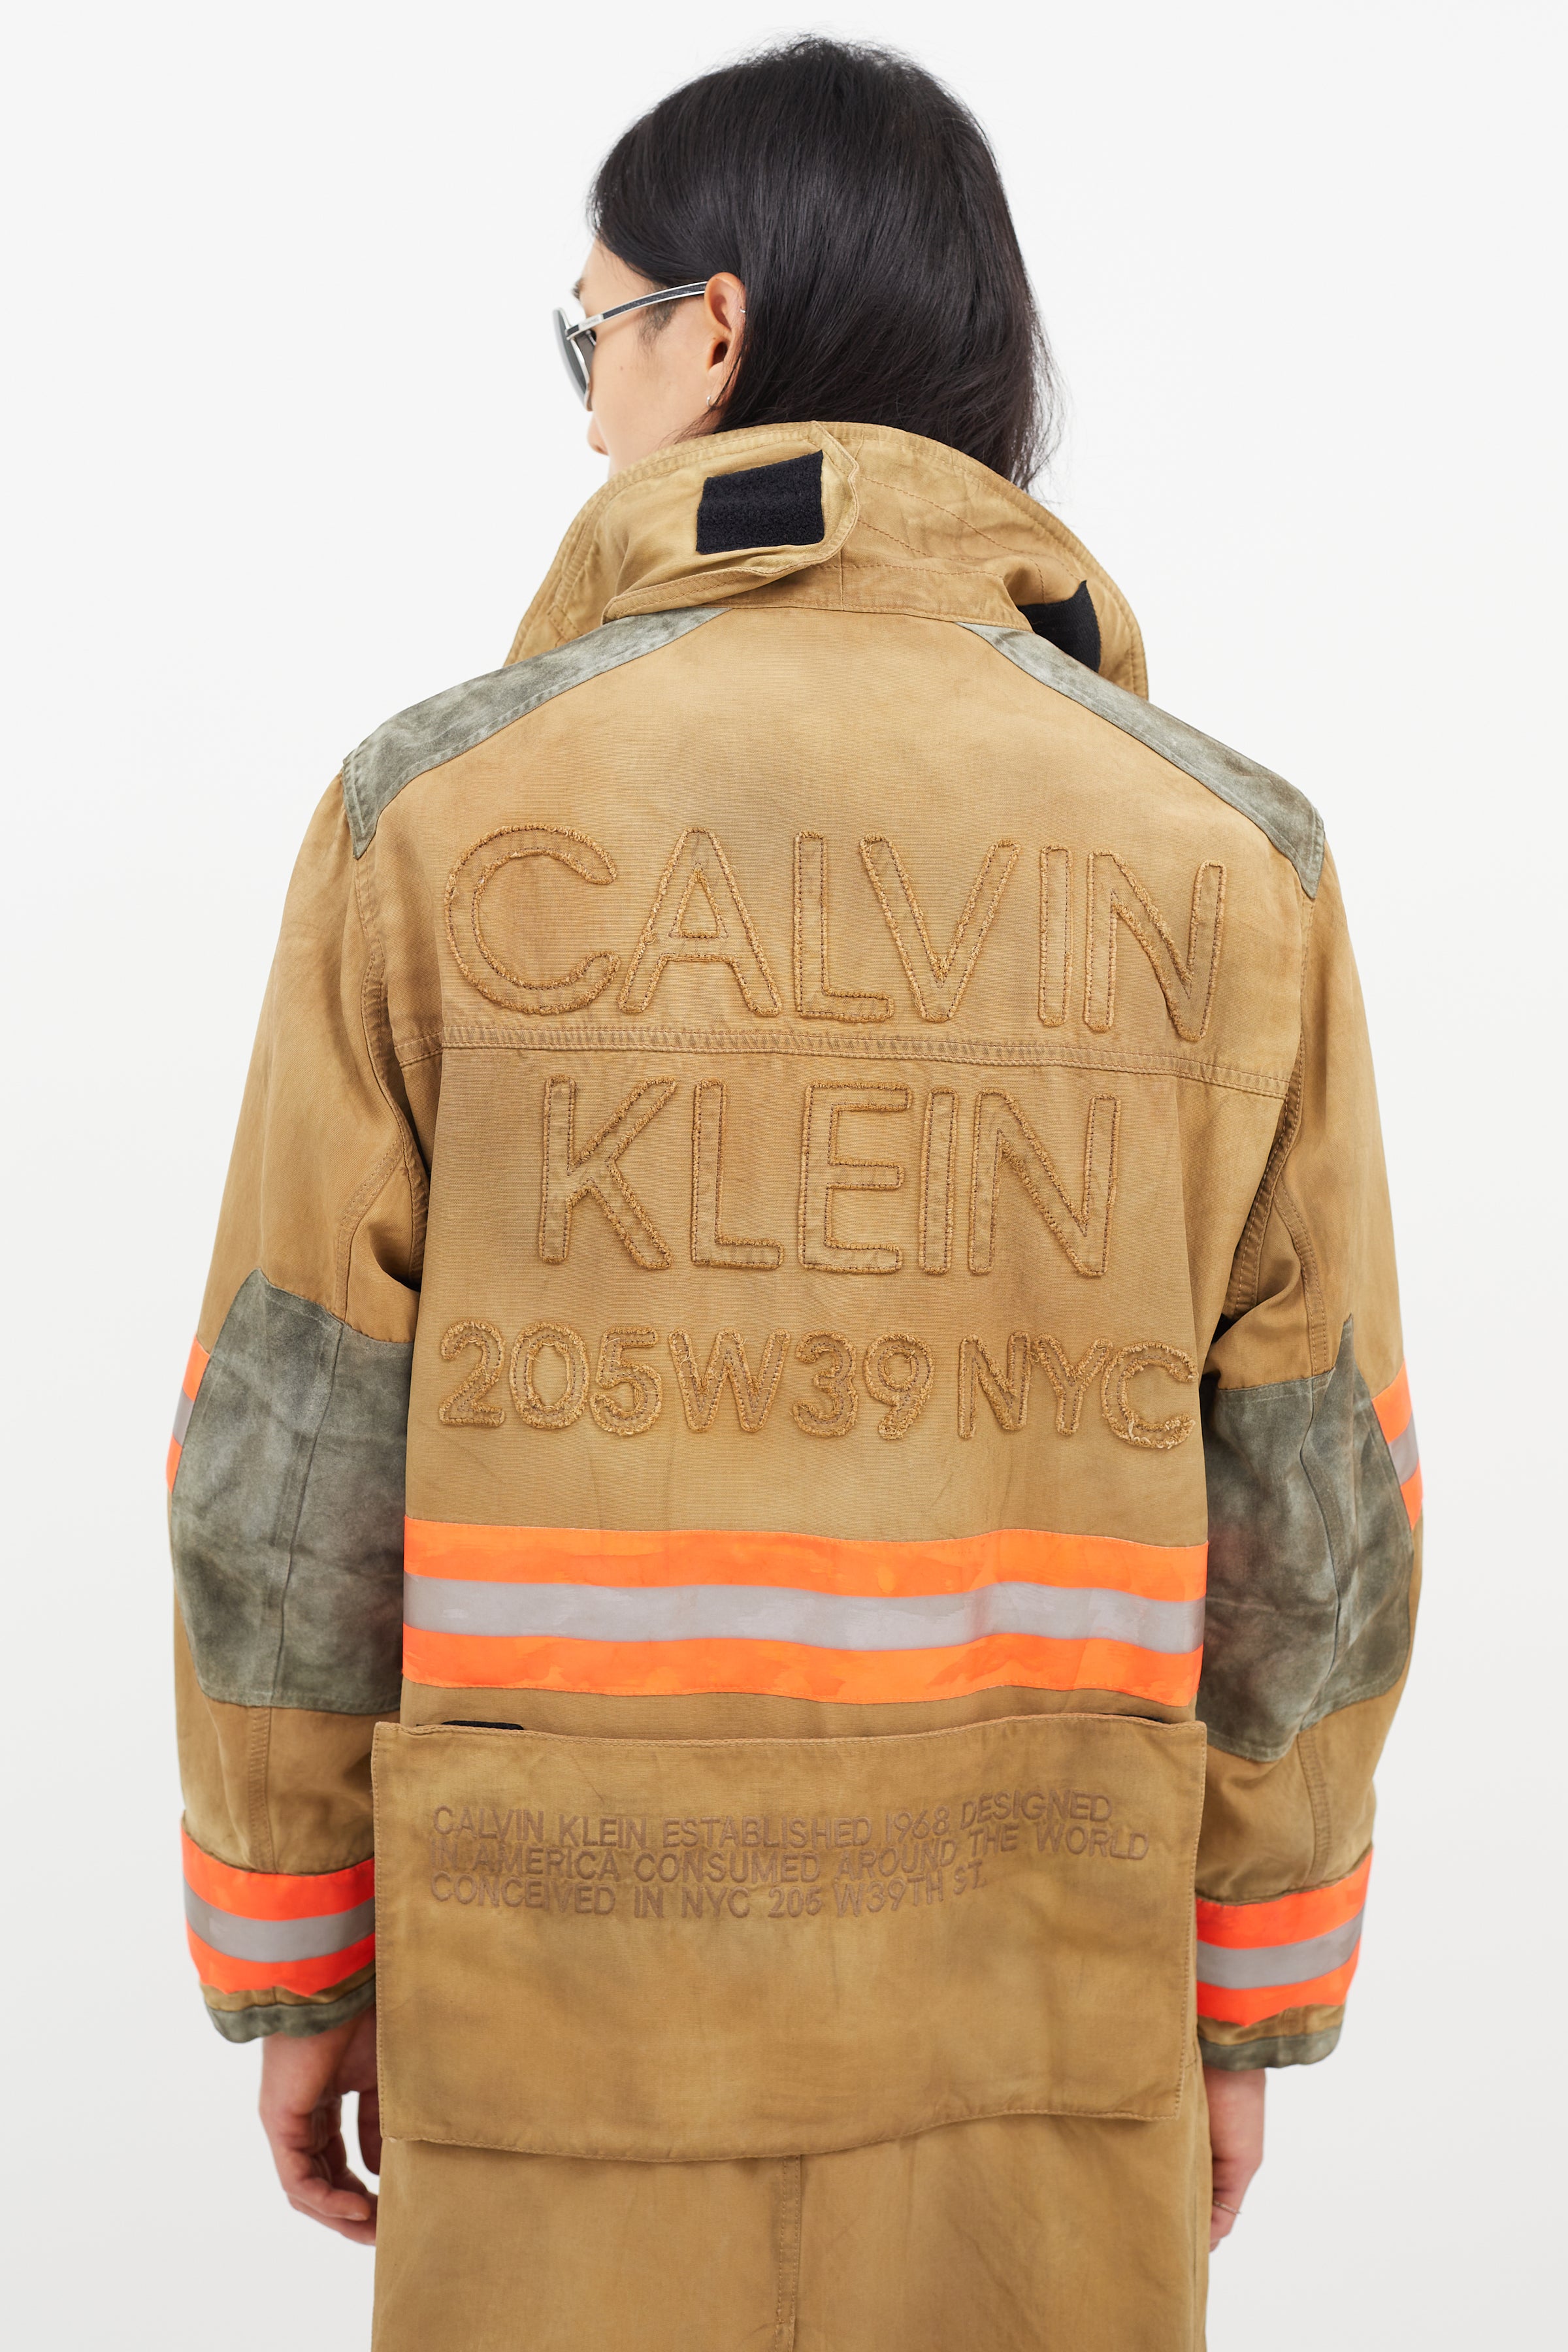 Consignment Klein Multicolour Calvin Reflective Jacket Firefighter 205W39NYC VSP Beige & – //